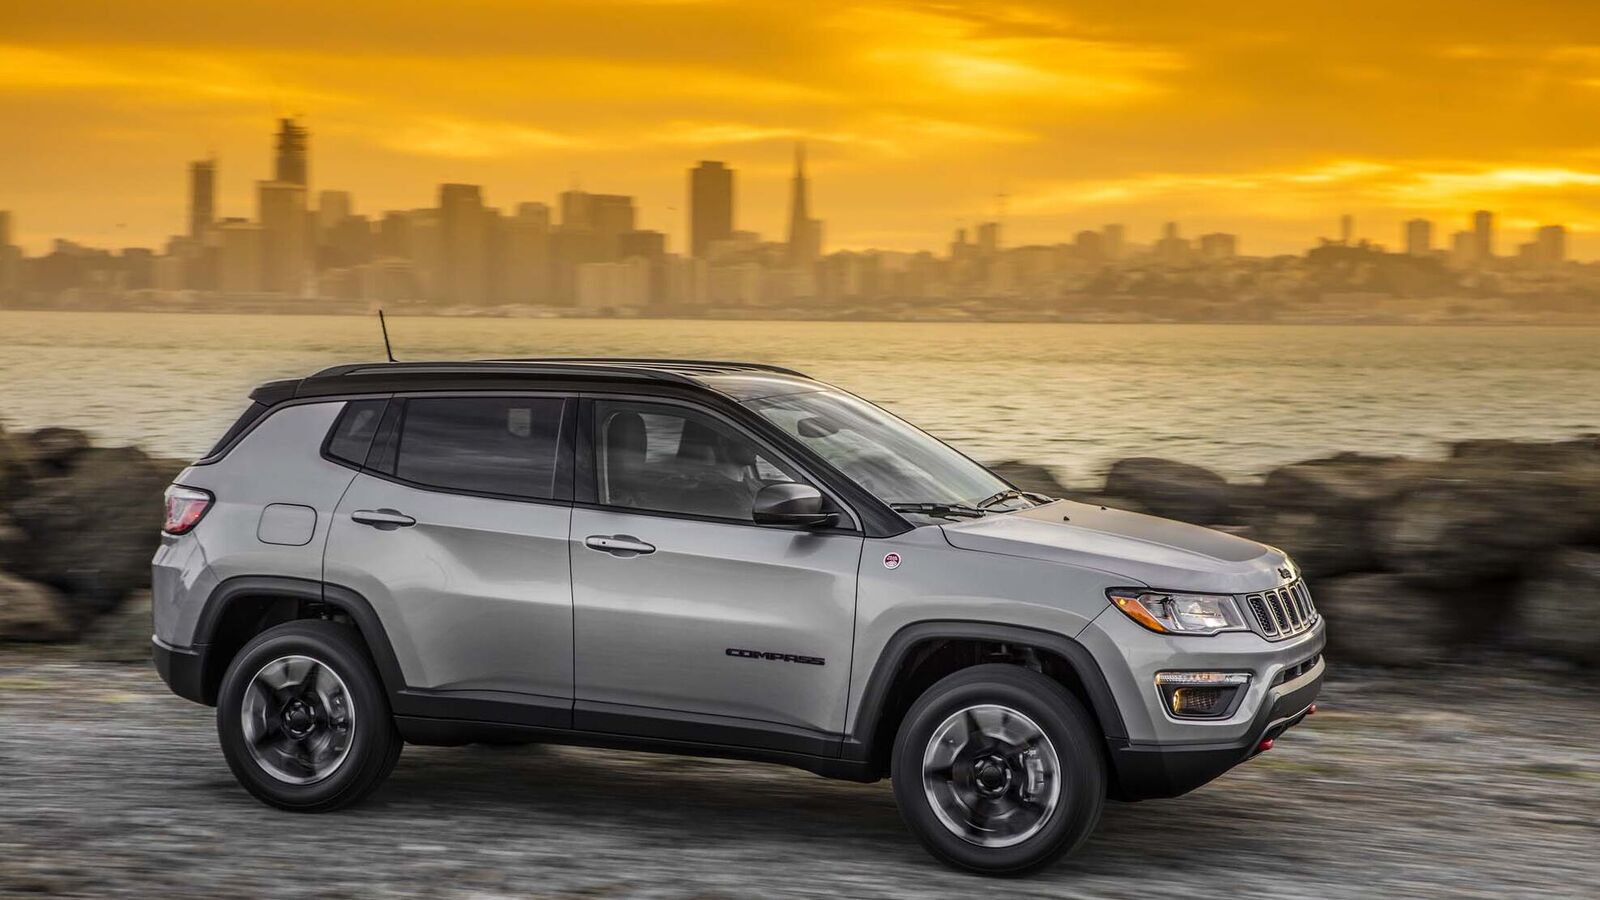 2022 Jeep Compass Trailhawk listed on official website ahead of